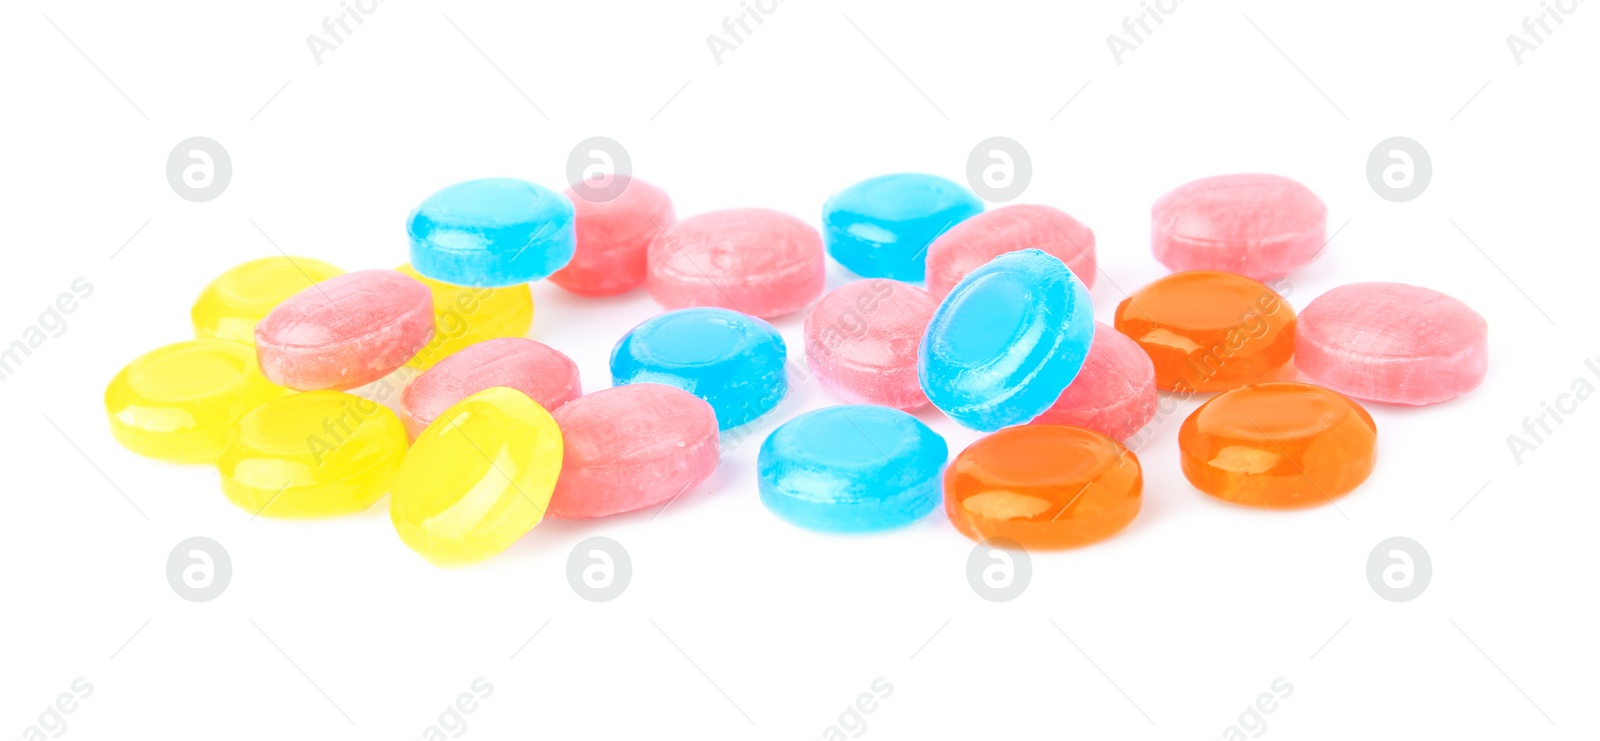 Photo of Many different colorful cough drops on white background